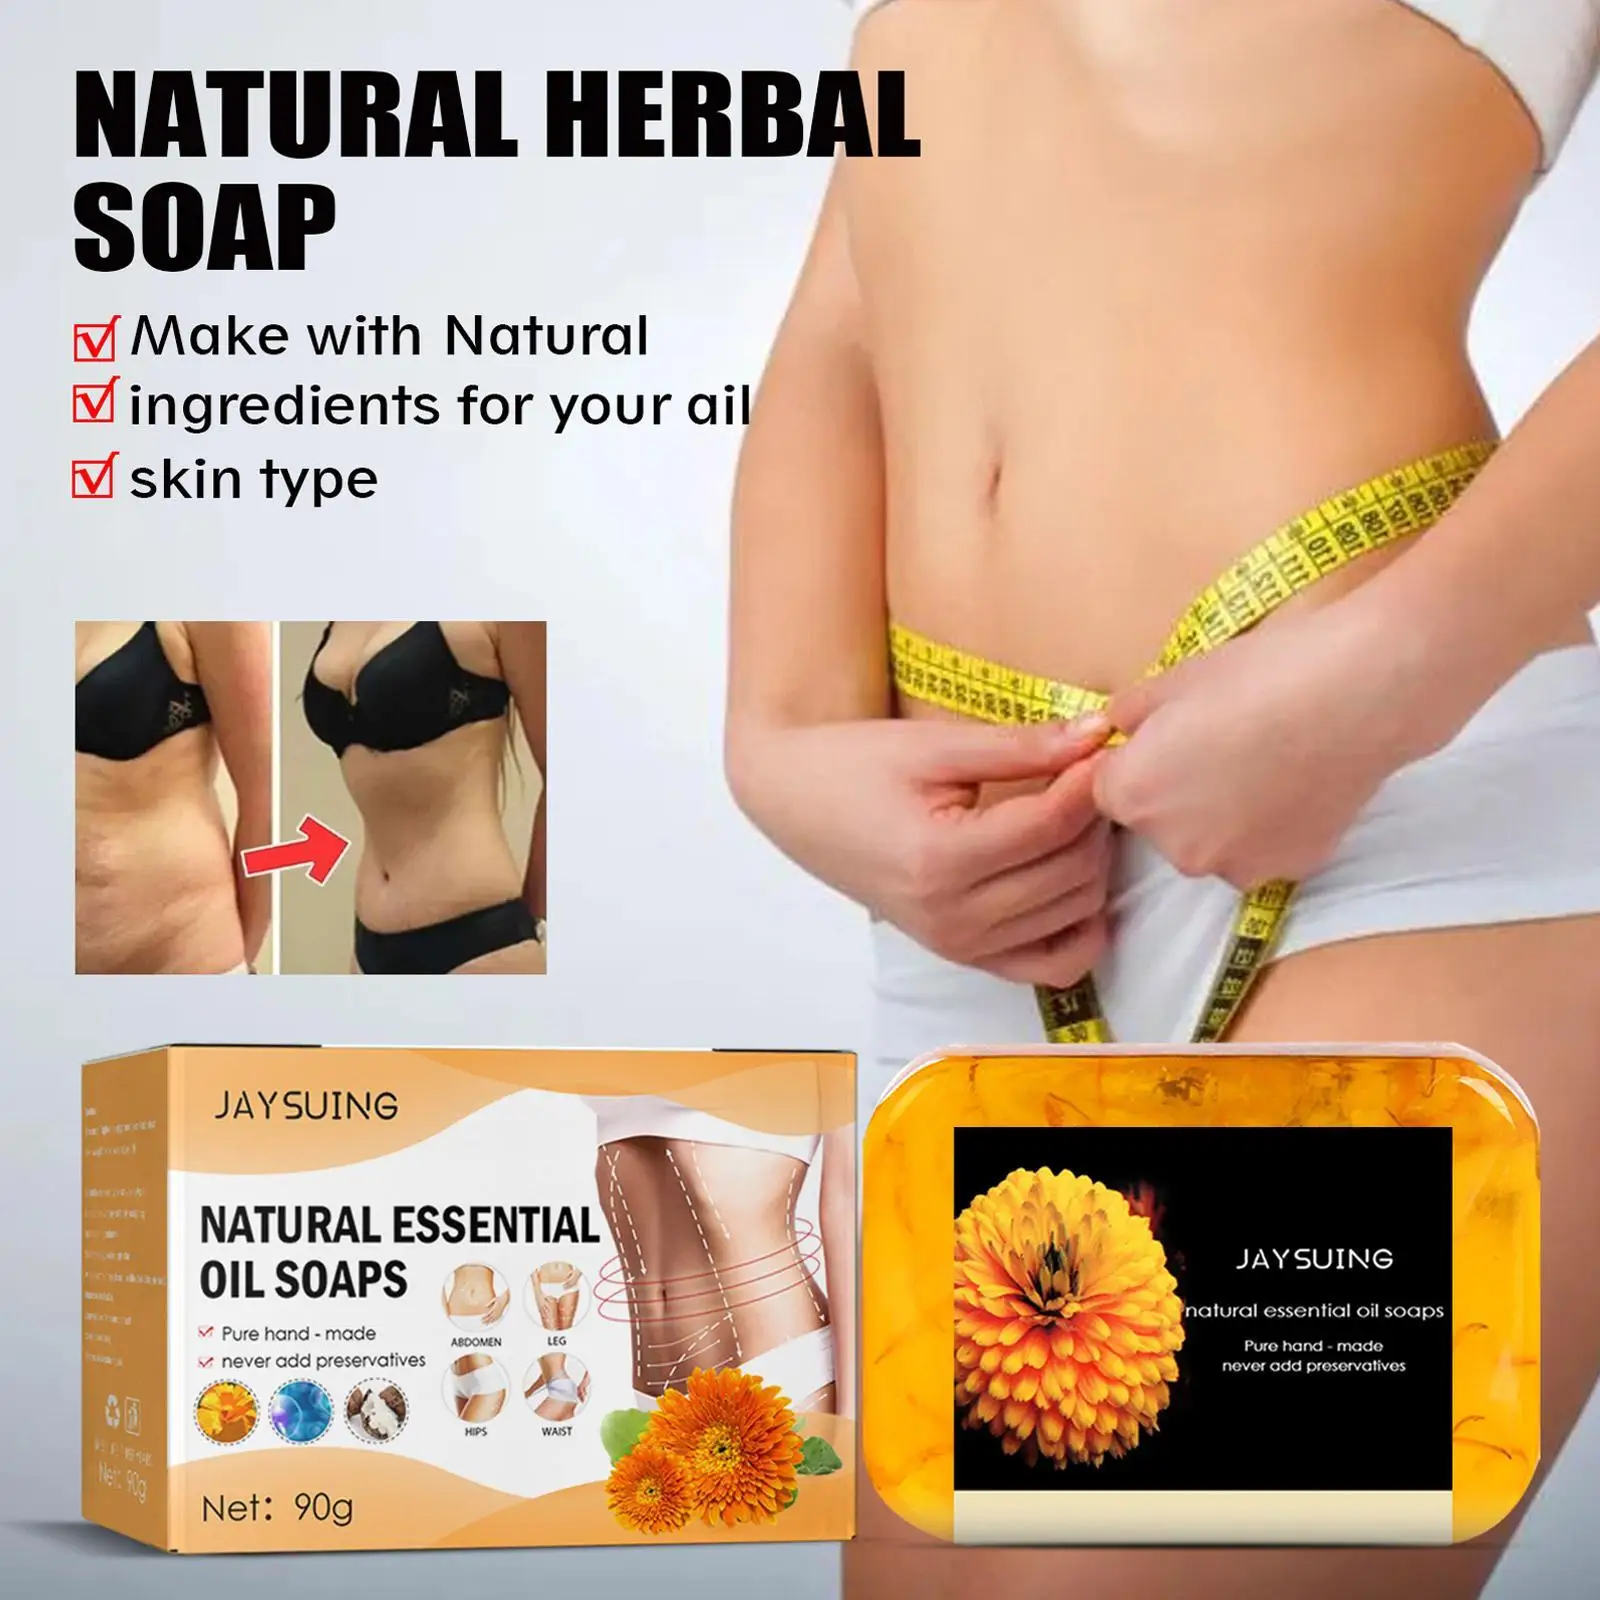 

110g Anti Cellulite Firming Soap Fat Burning Slimming Weight Loss Extra Firm Soap Calendula Flower Essential Oil Handmade Soap